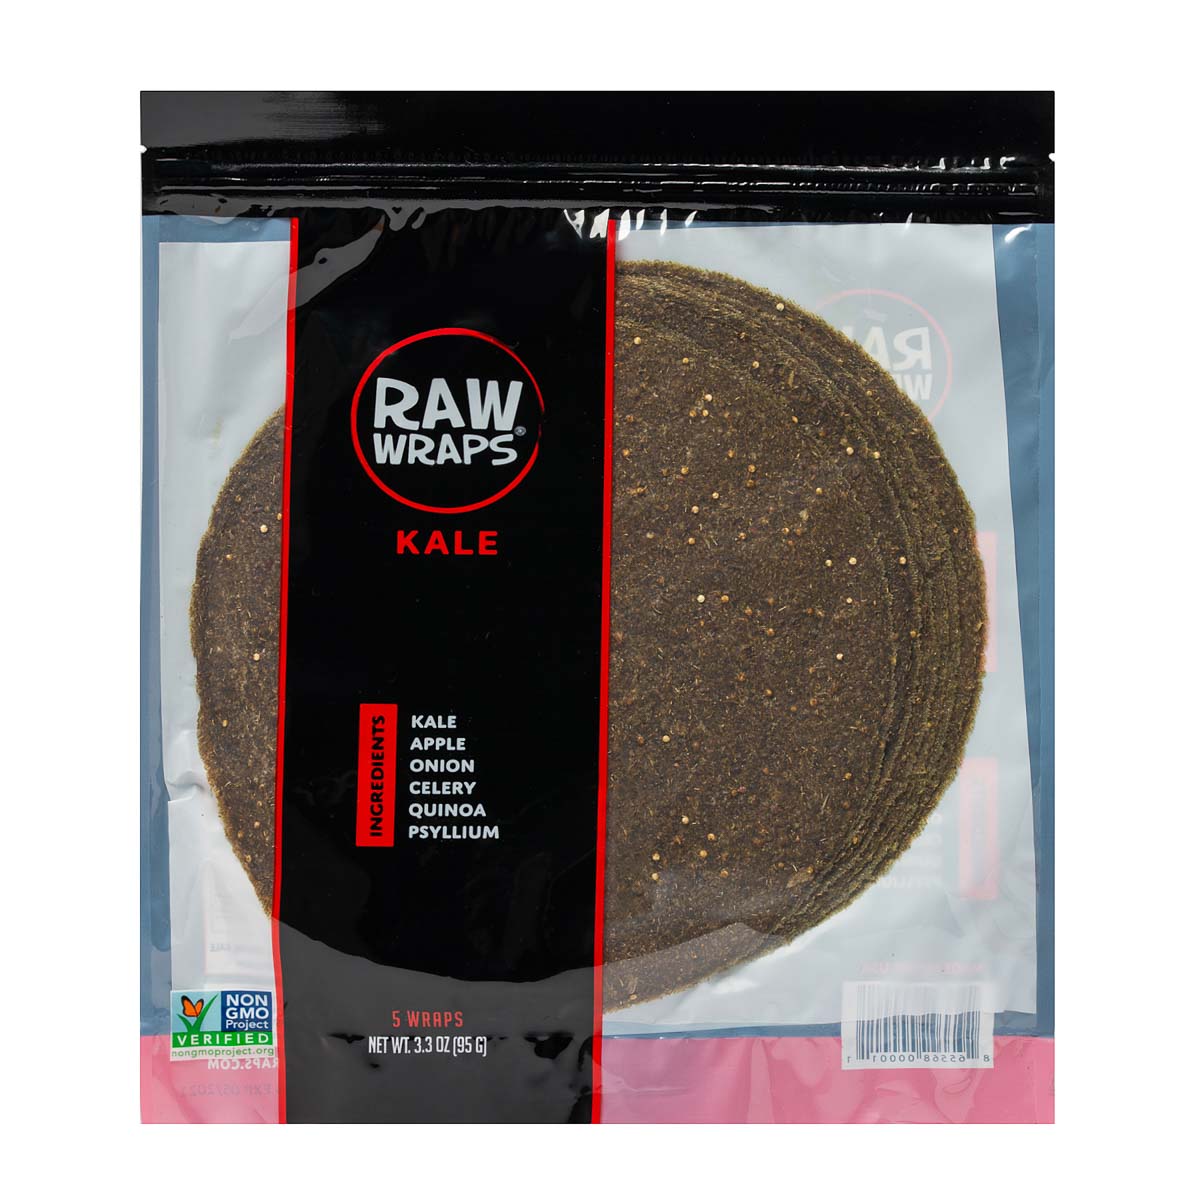 Raw Wrap Kale | Greenleaf Foods | Raw Living UK | Raw Foods | Greenleaf Raw Kale Wraps are made out of Veggies and Fruit; Fresh Kale is combined with Apples and Quinoa to create a Soft and Pliable Raw, Vegan Wrap.